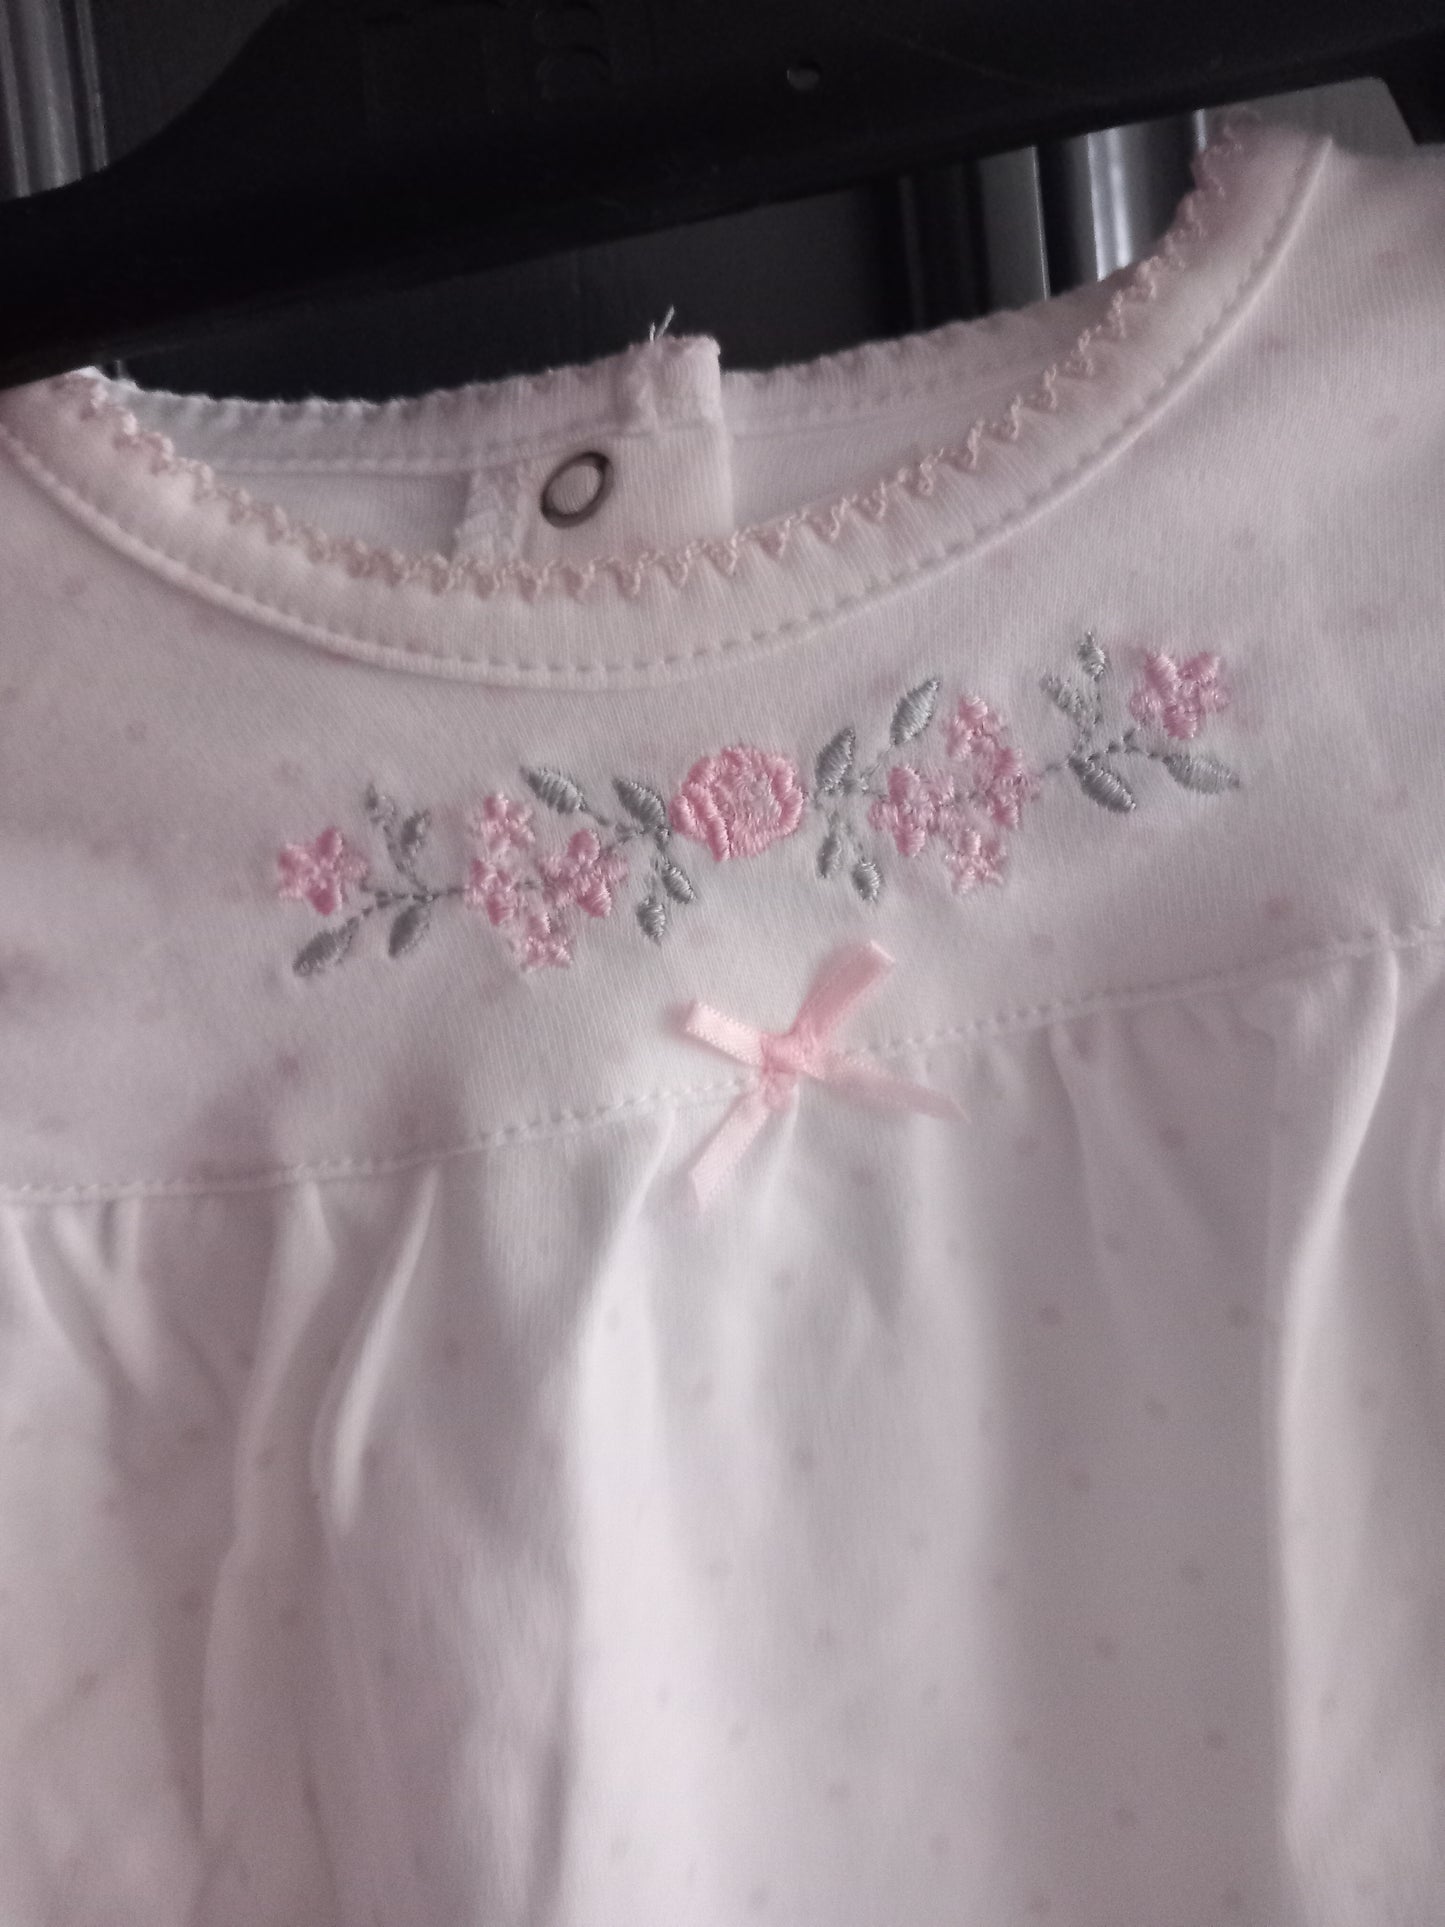 6 MTHS BABY 2 PIECE CREAM EMBROIDERED TOP AND SHORTS